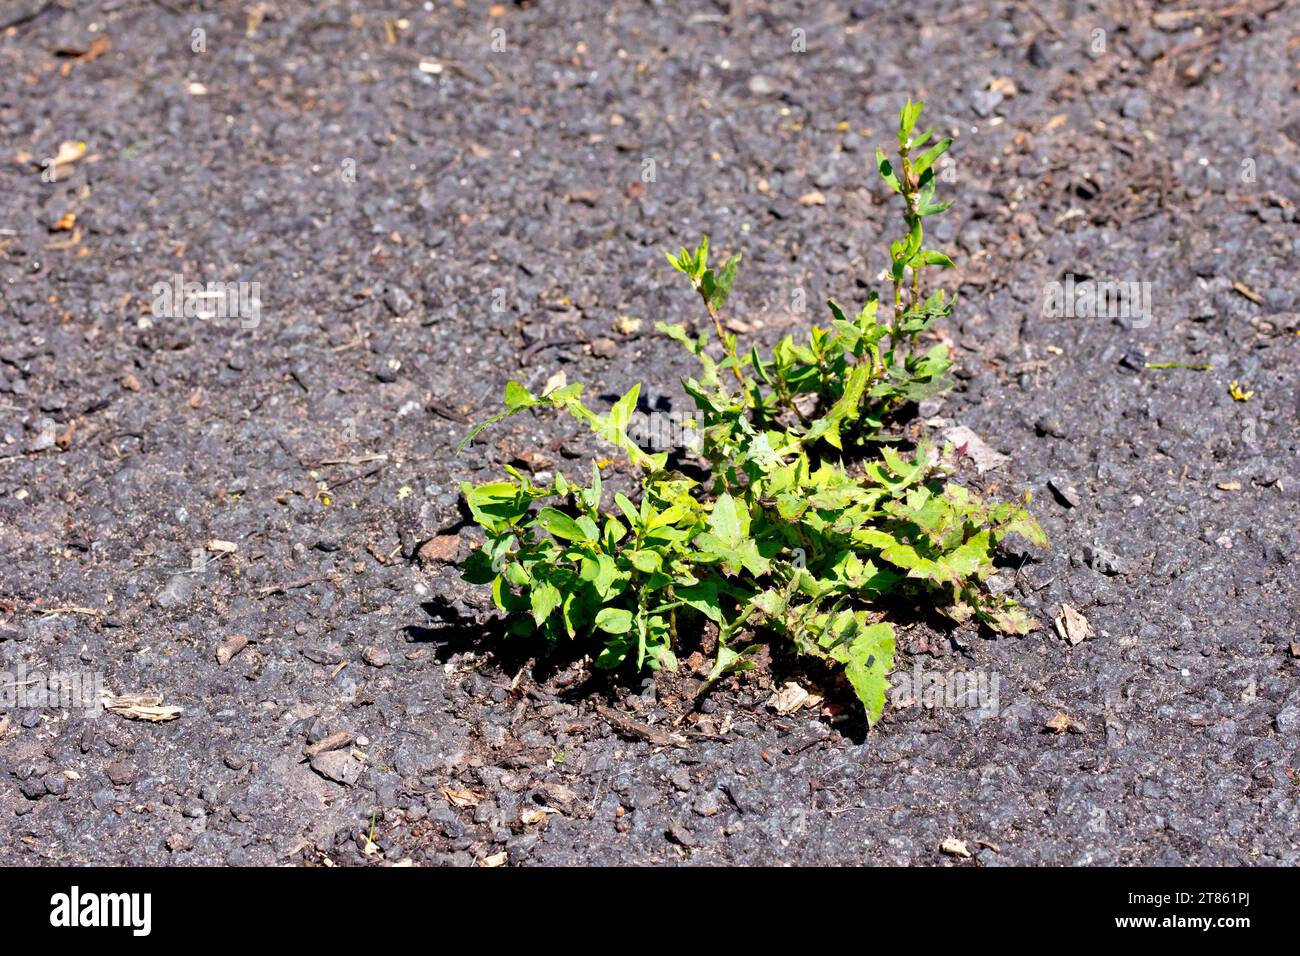 Knotgrass (polygonum aviculare), close up of a plant growing alongside Dandelion leaves (taraxacum officinale) from a crack in a tarmac path. Stock Photo